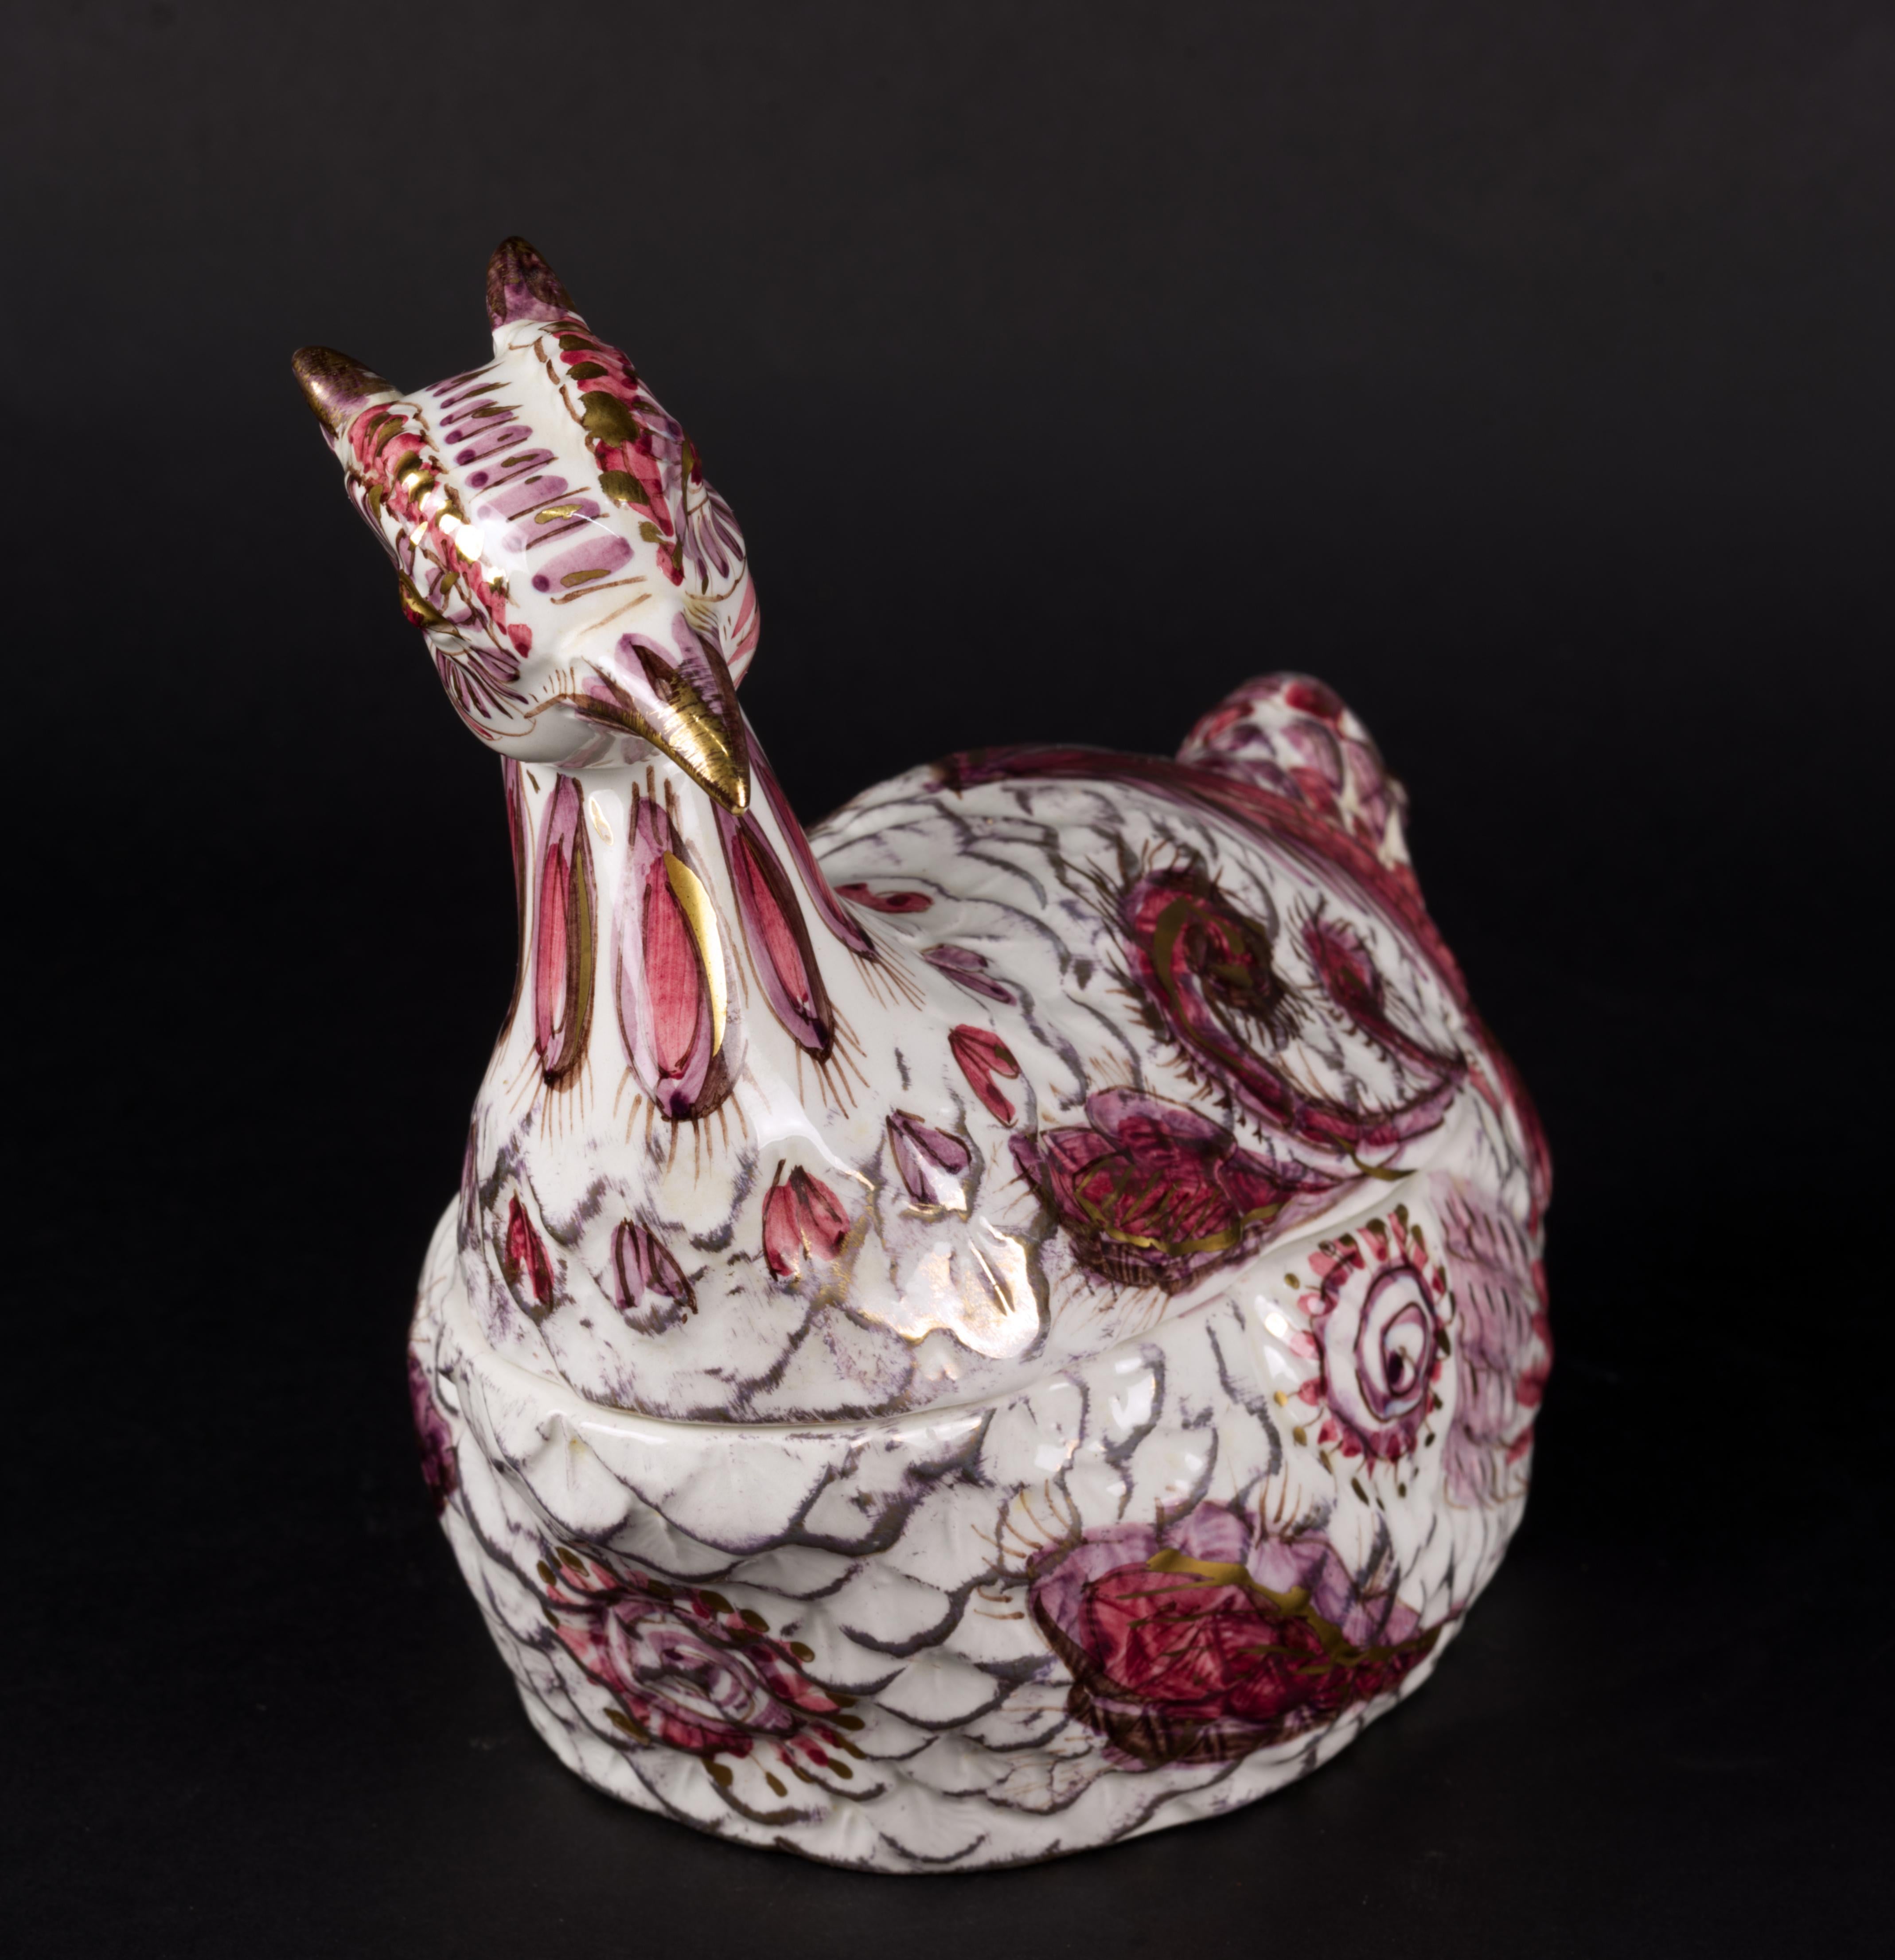  Vintage pheasant tureen with tail ladle was made in Italy by Mancioli Company. The bowl with the lid on forms a shape of a pheasant; the ladle forms its tail. It is decorated in rustic style in pink and cranberry red on white body with elaborate